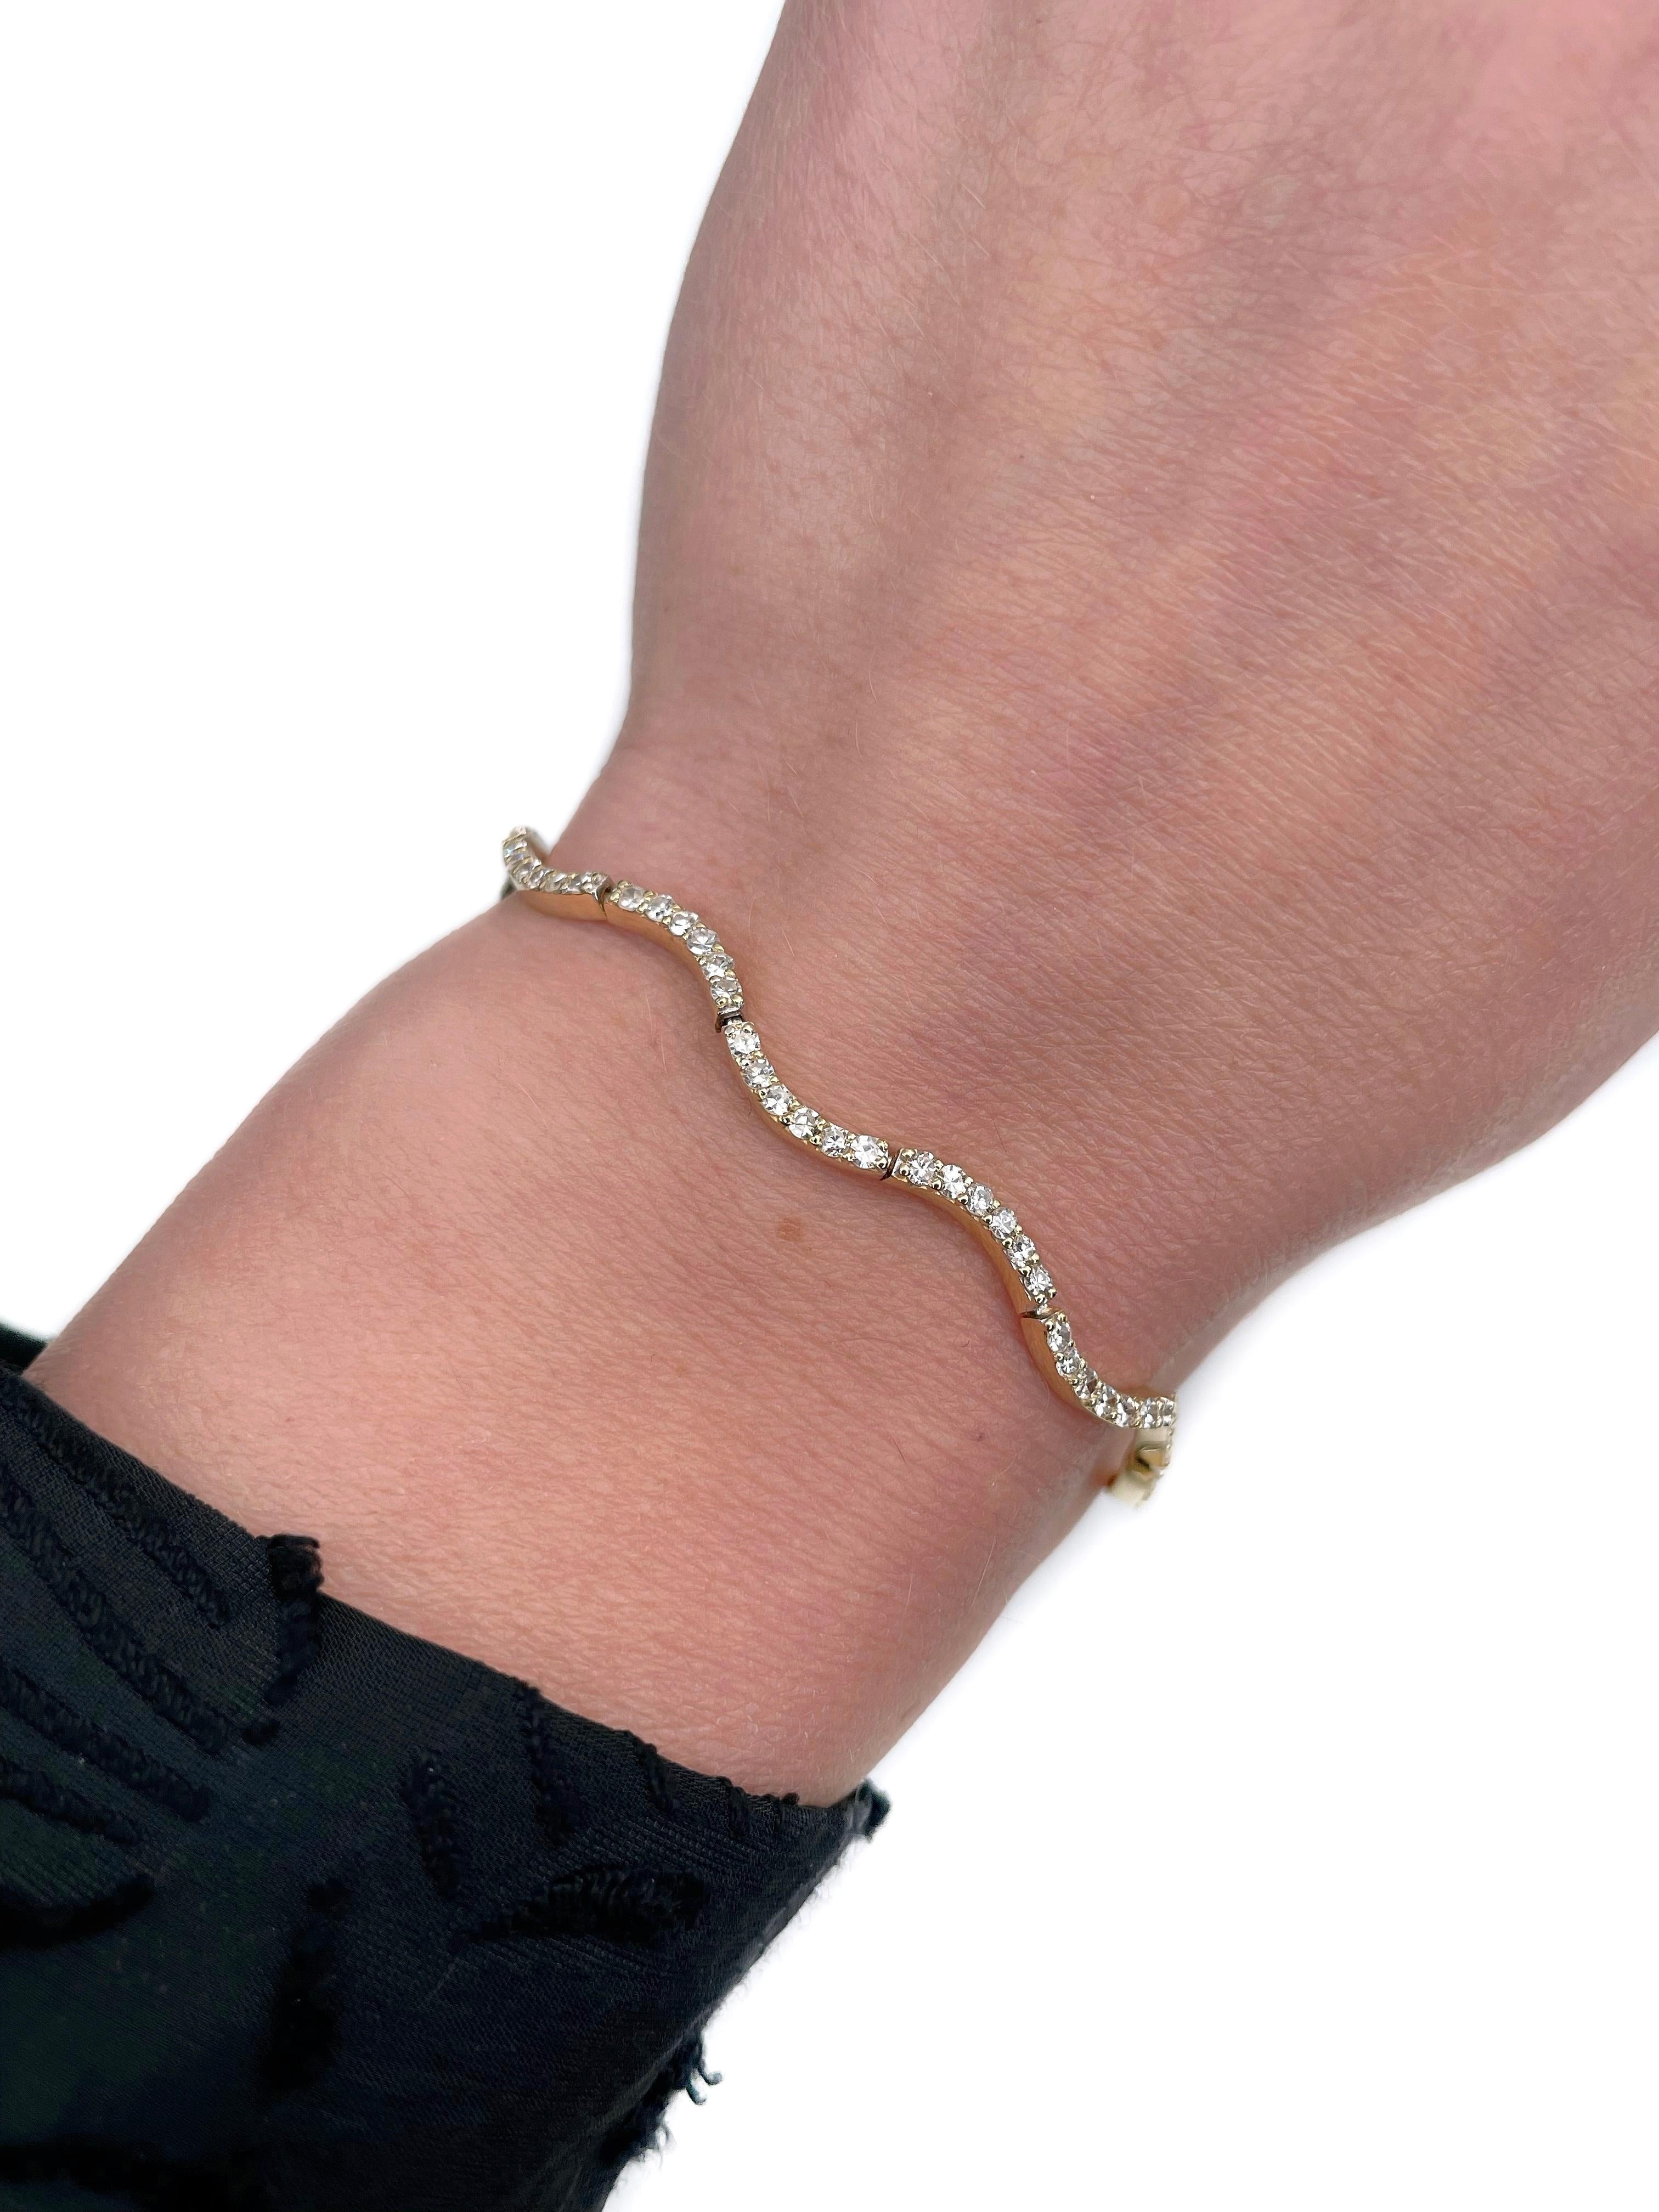 This is a modern wave tennis bracelet crafted in 18K yellow gold. Circa 2000. 

The piece features 96 diamonds: RBC-17, TW 1.65ct, RW+/W, VS-SI

Weight: 7.48g
Length: 18.5cm

———

If you have any questions, please feel free to ask. We describe our